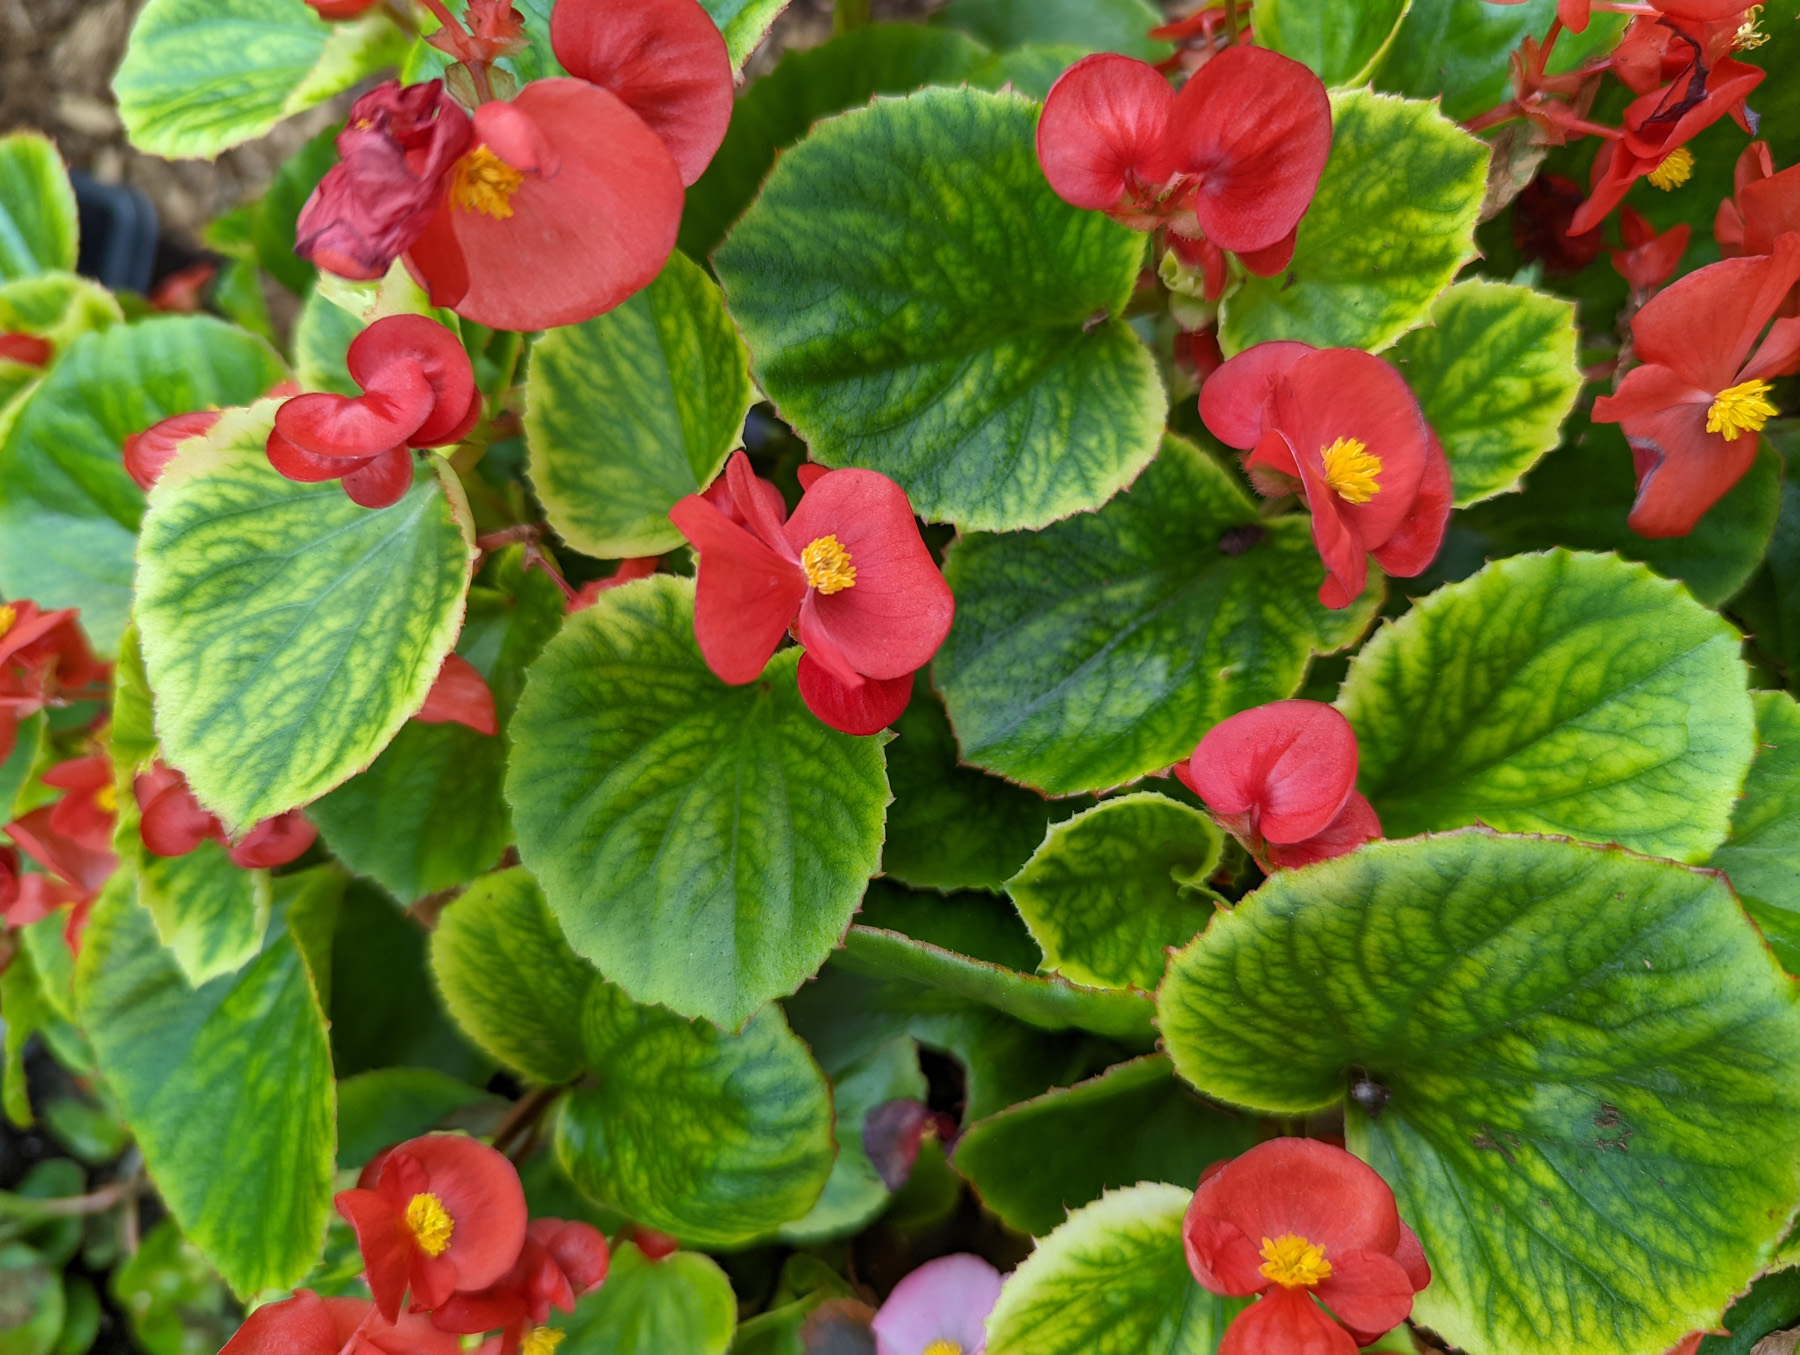 They can be used as bedding plants, in window boxes and in hanging baskets. Their bright colorful flowers have sepals but no petals. 